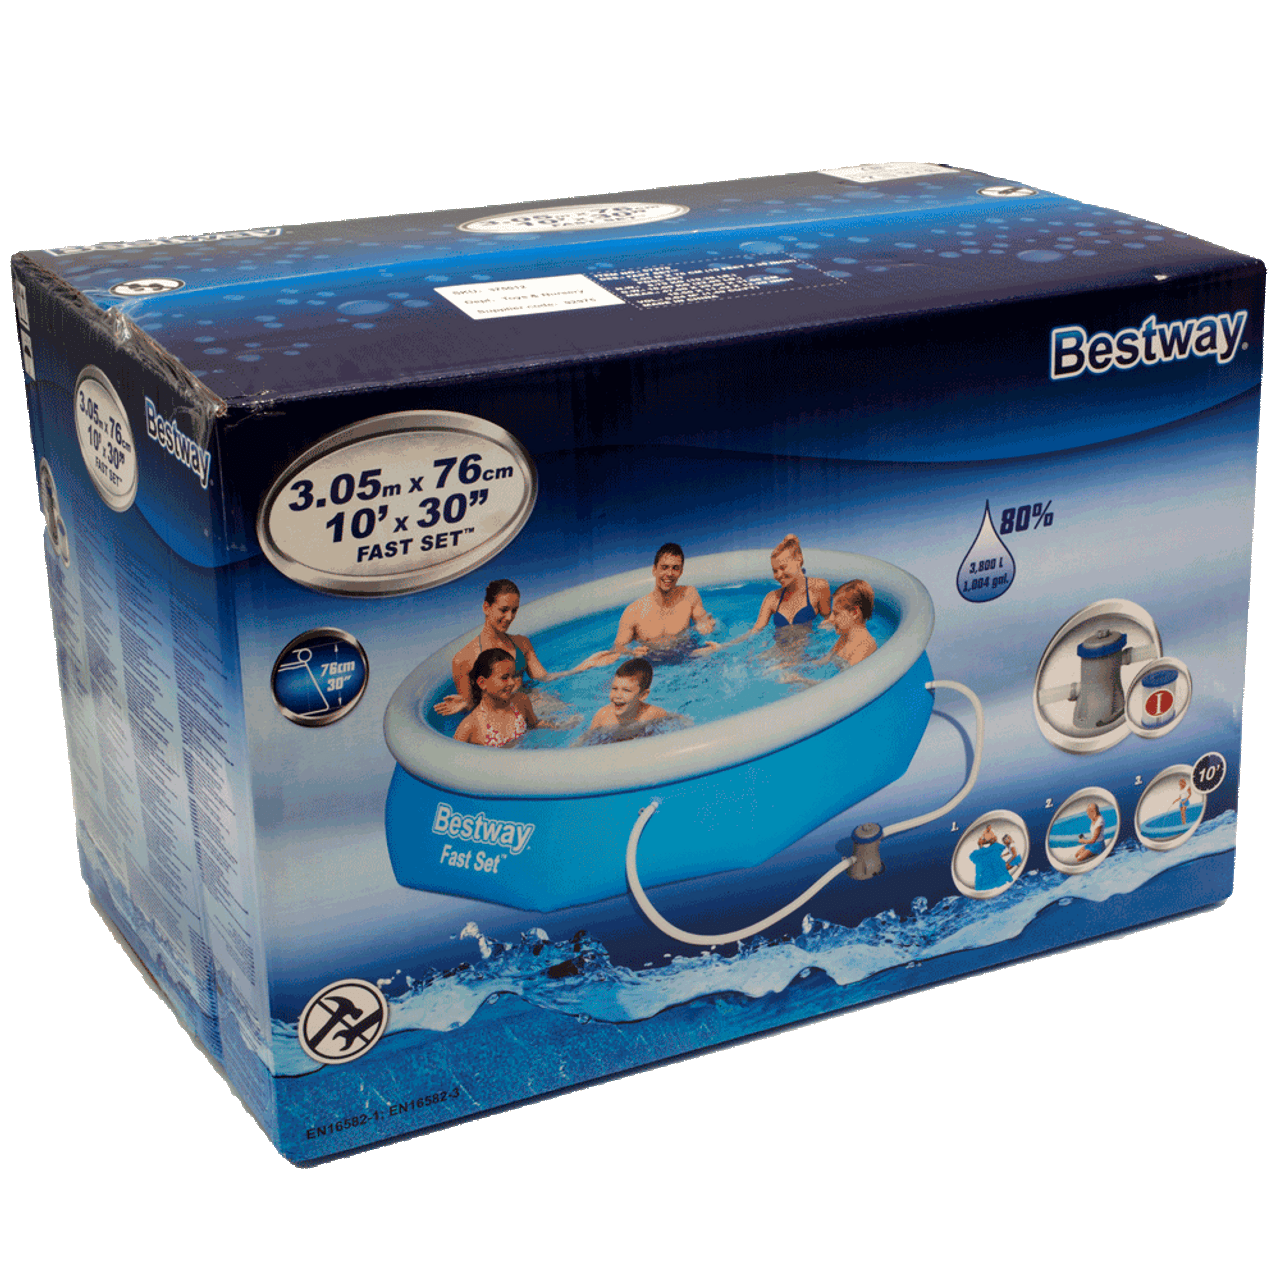 Hot Bestway in & PVC Fast Pool 3.05m with set Swimming Pool Filter tub 10\